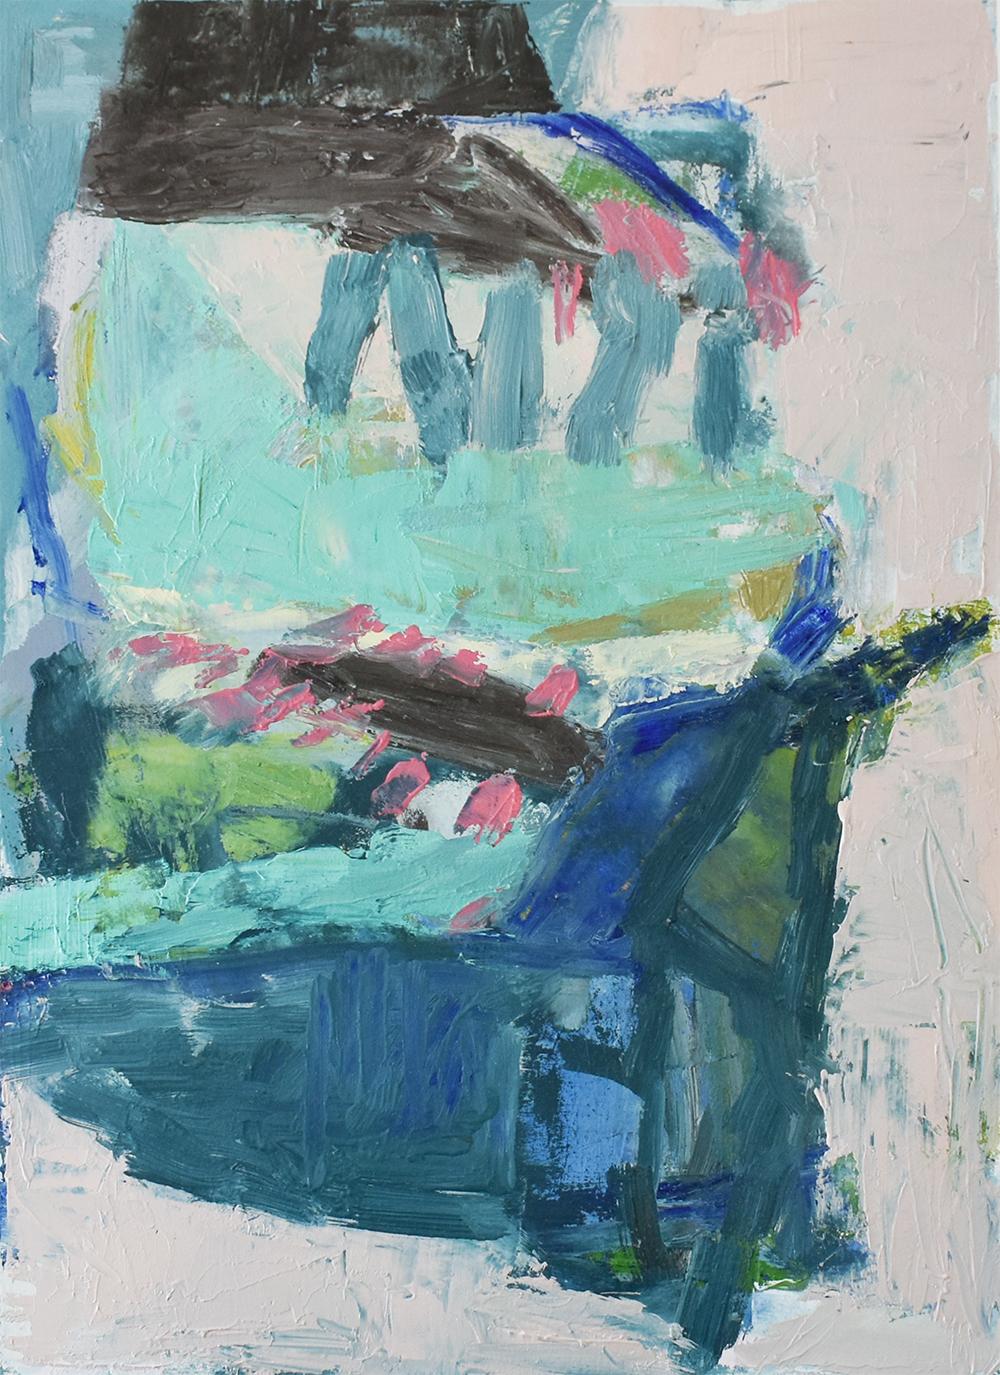 No. 2: Abstract Expressionist Oil on Canvas Paper in Blue, Teal & Light Pink